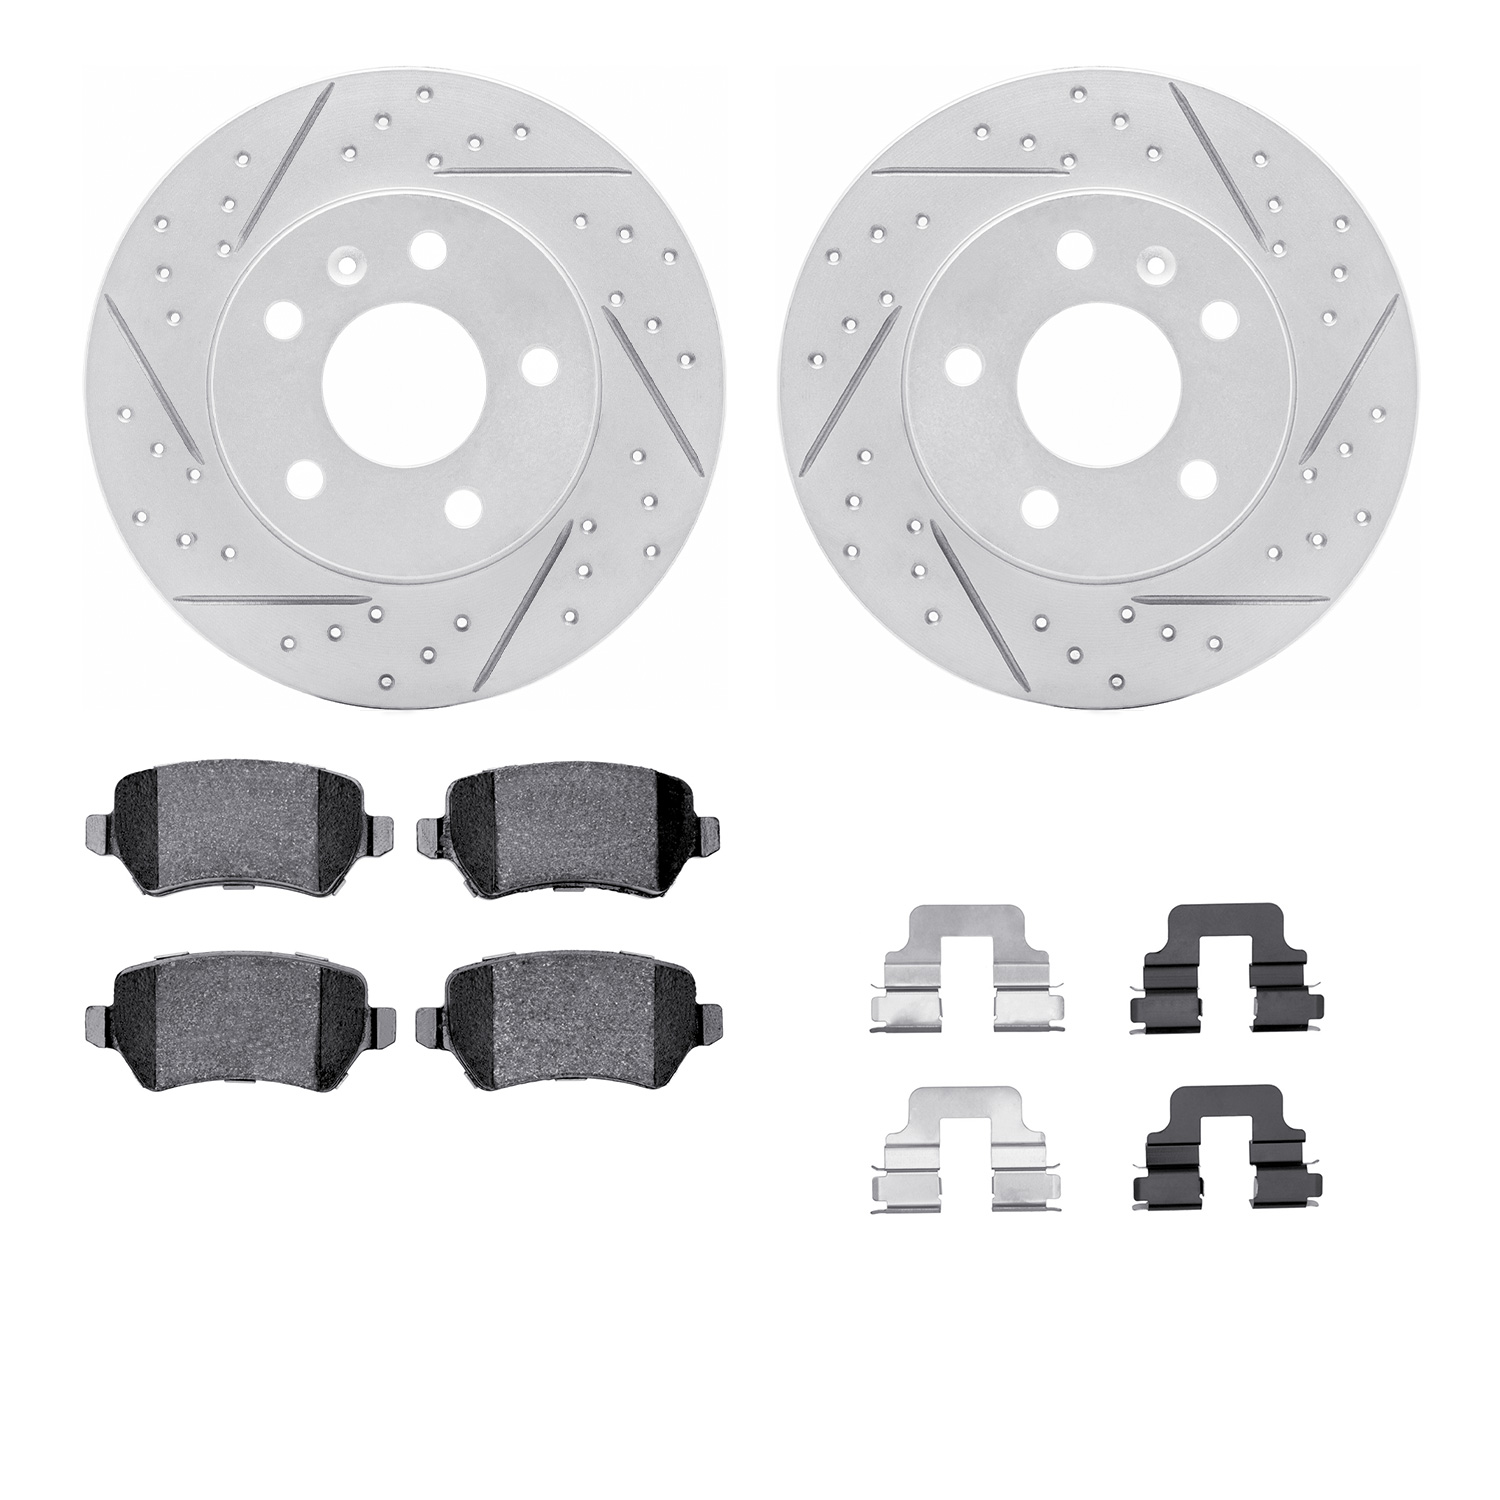 2512-53008 Geoperformance Drilled/Slotted Rotors w/5000 Advanced Brake Pads Kit & Hardware, 2002-2008 GM, Position: Rear